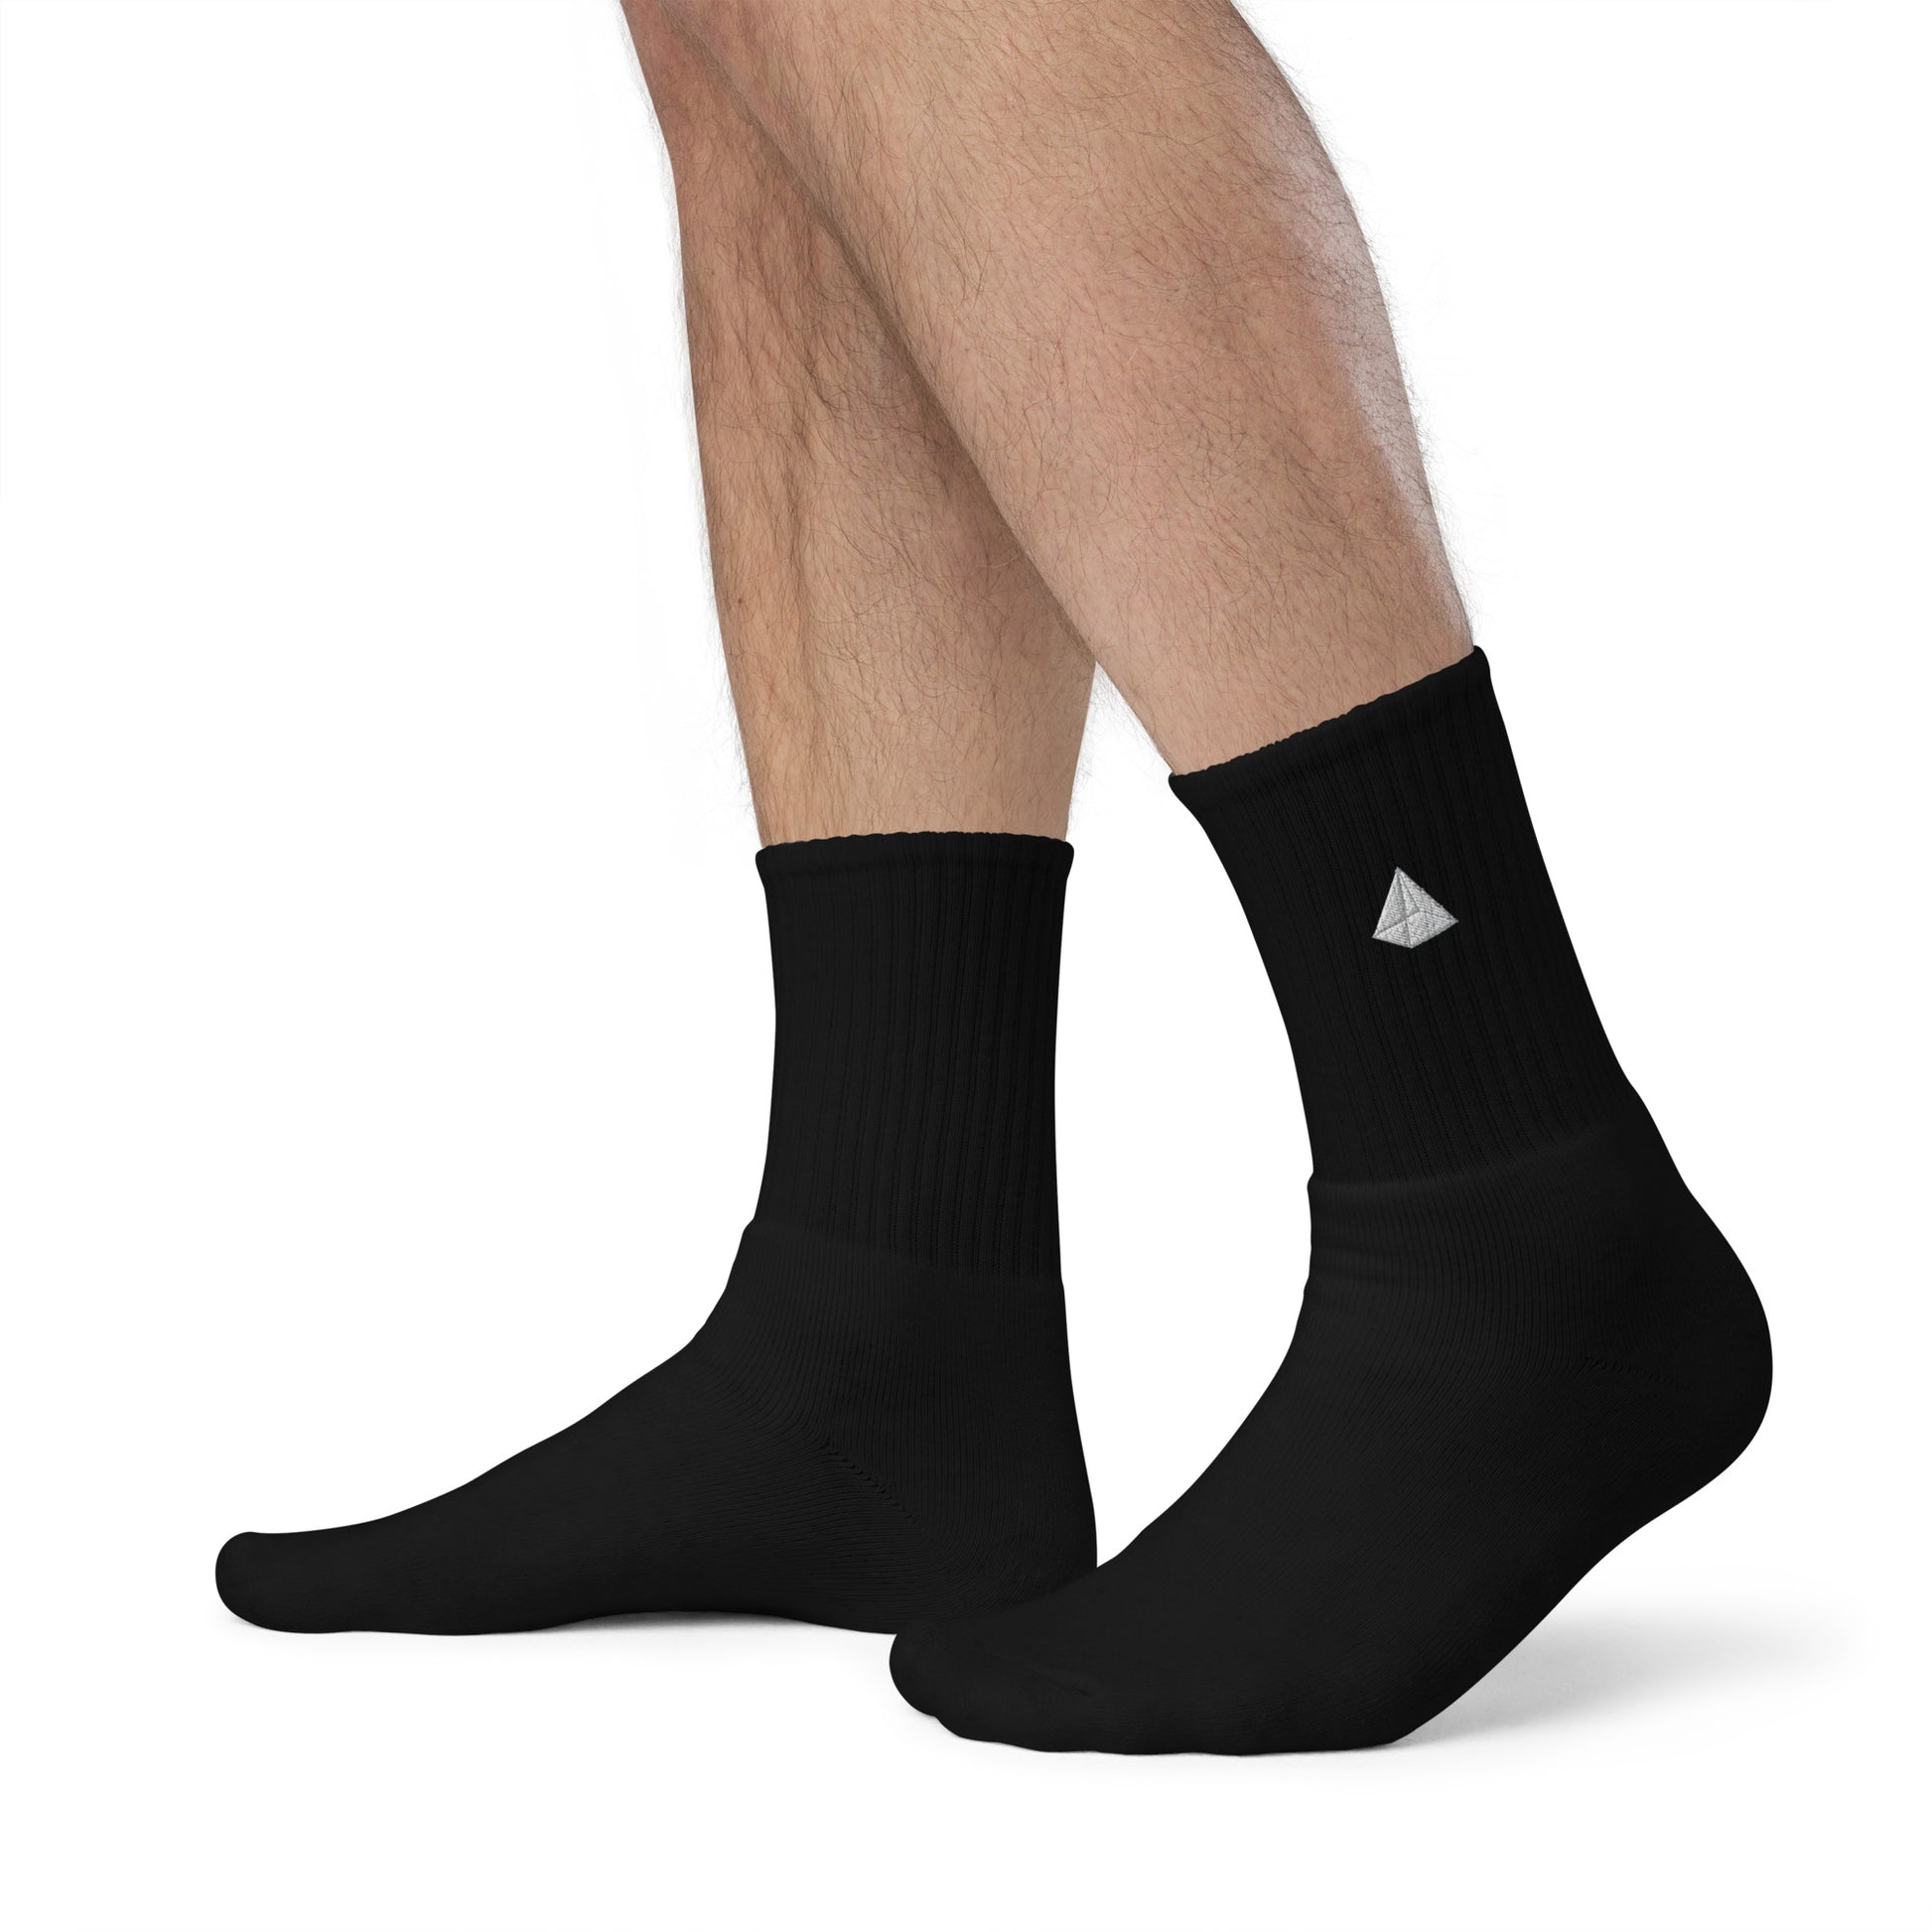 socks-from-the-side-with-pyramid-symbol